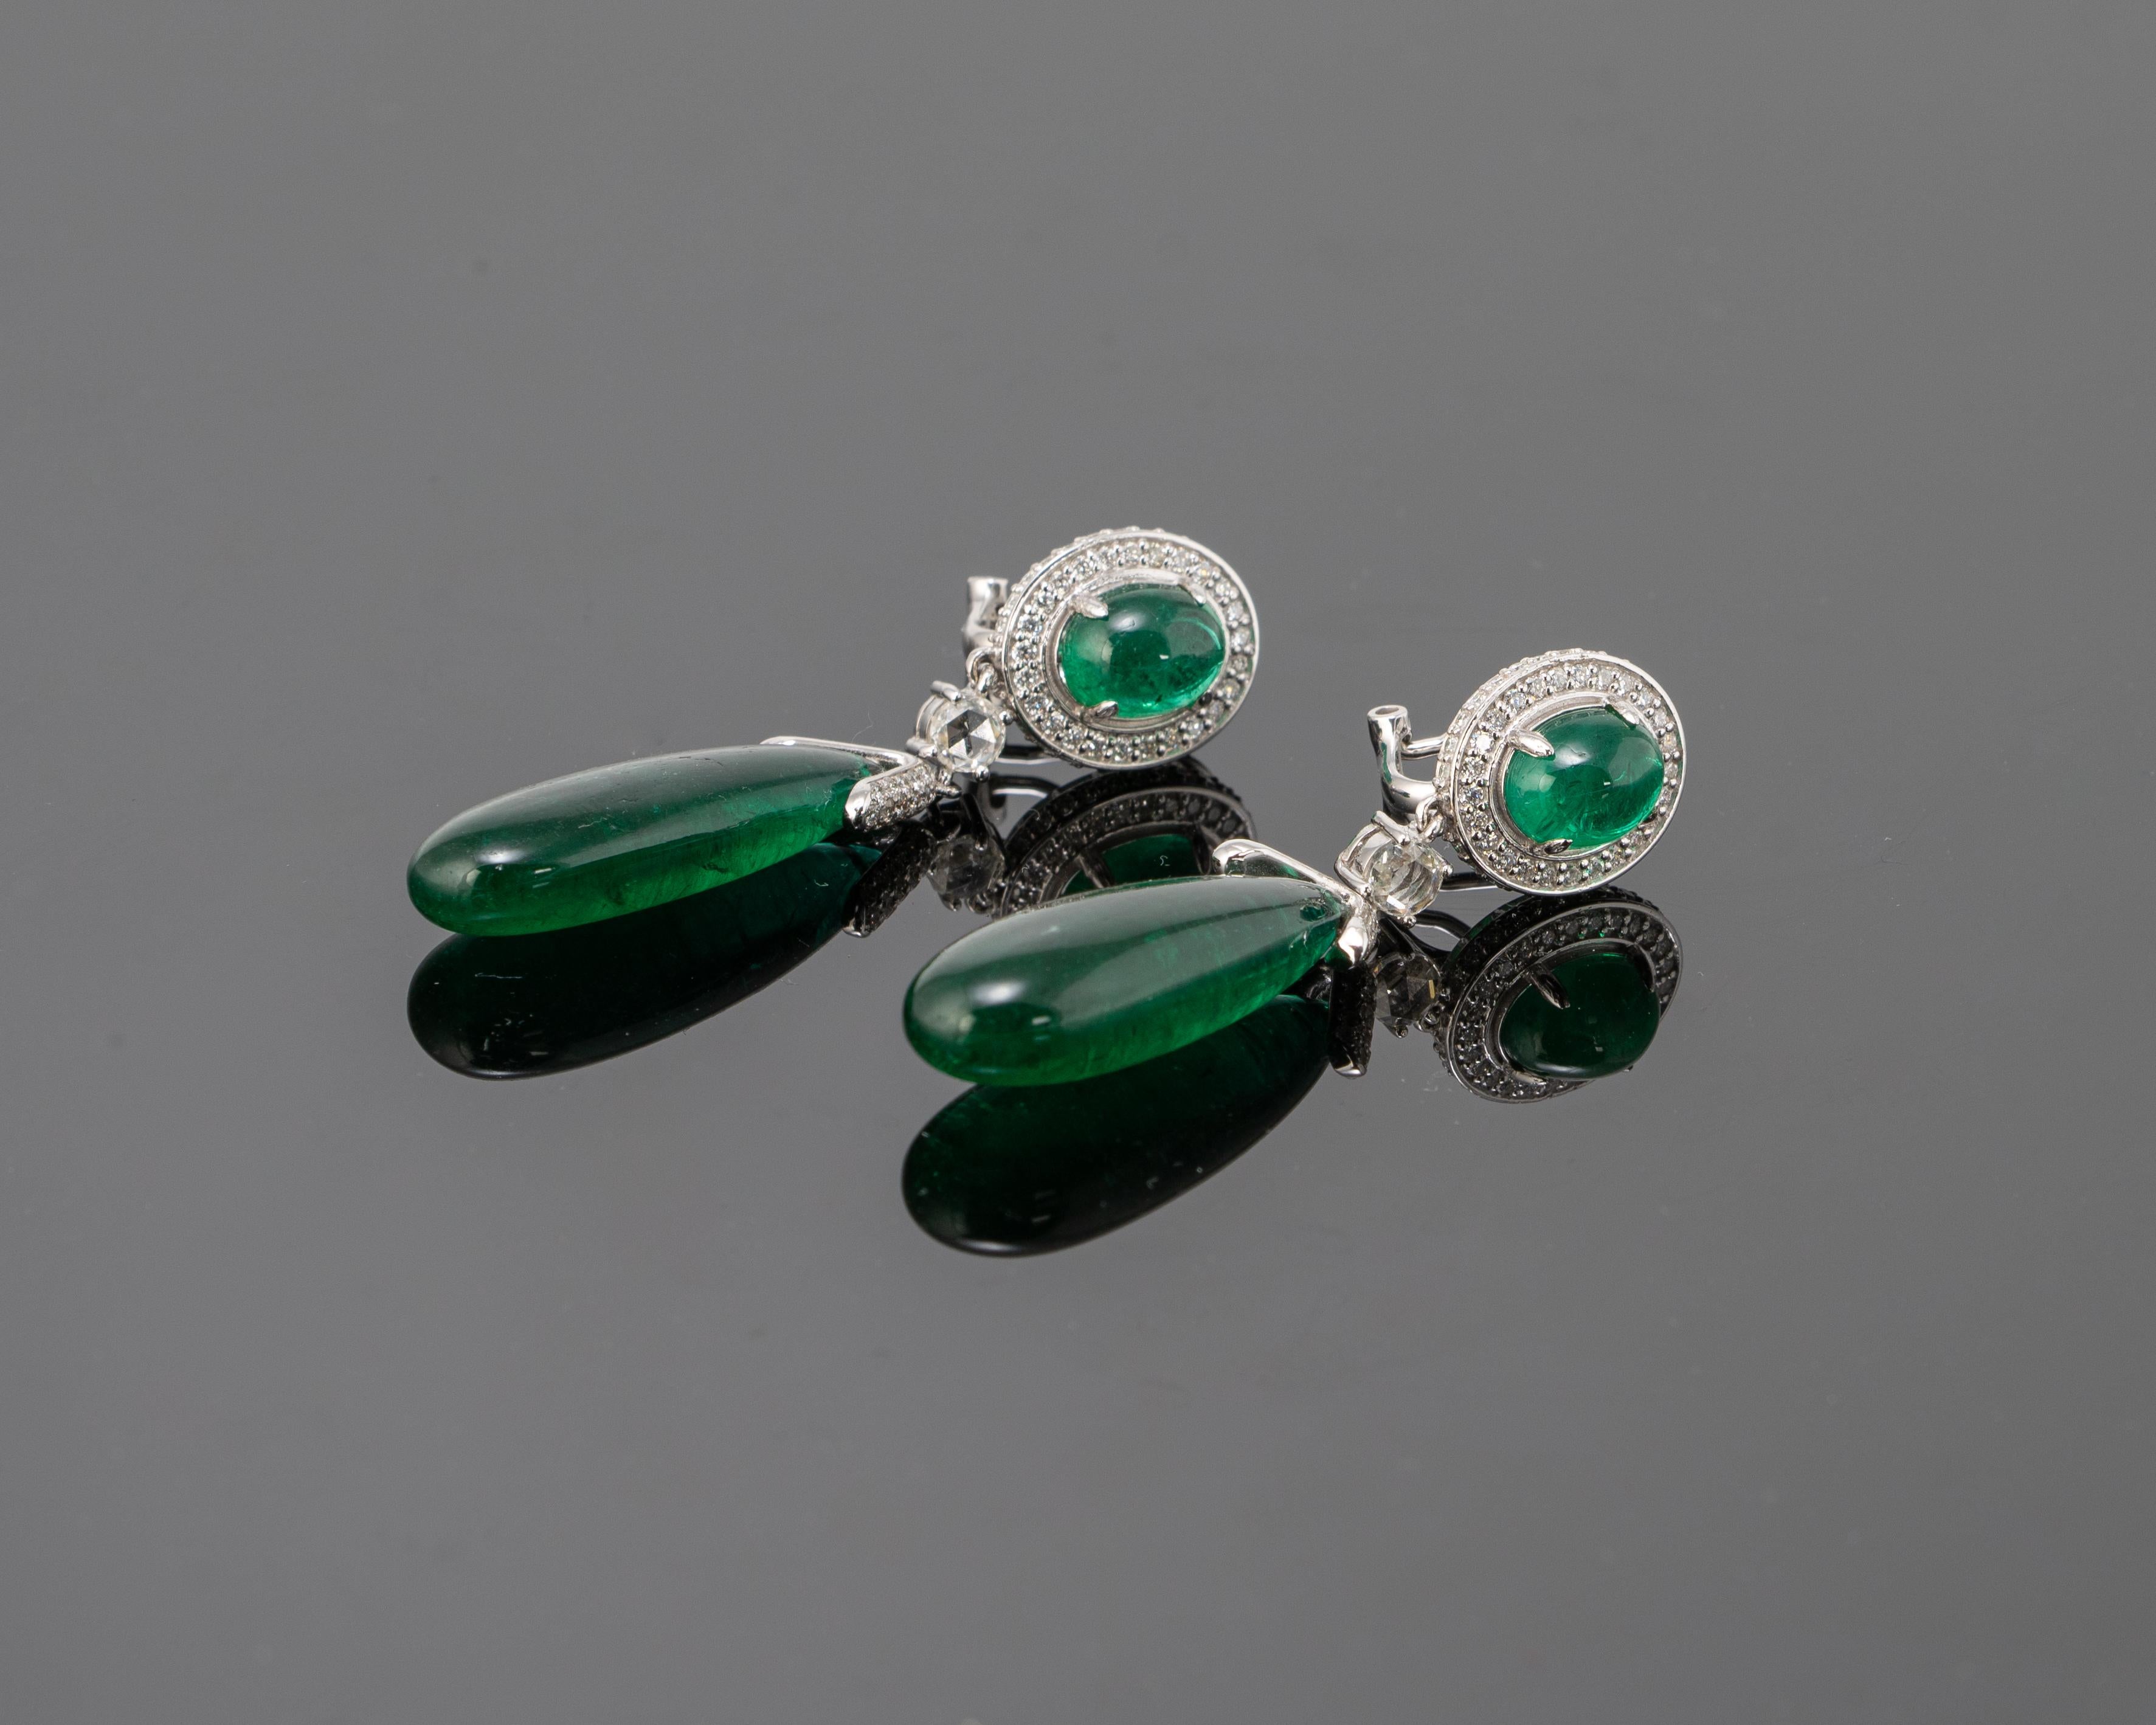 A stunning pair of 37.41 carats Emerald drop earrings and 4.91 carats Emerald cabochons, set with Diamonds in 18K White Gold. The earrings have an omega backing for extra support. Please feel free to message us if you have any queries. 
Free